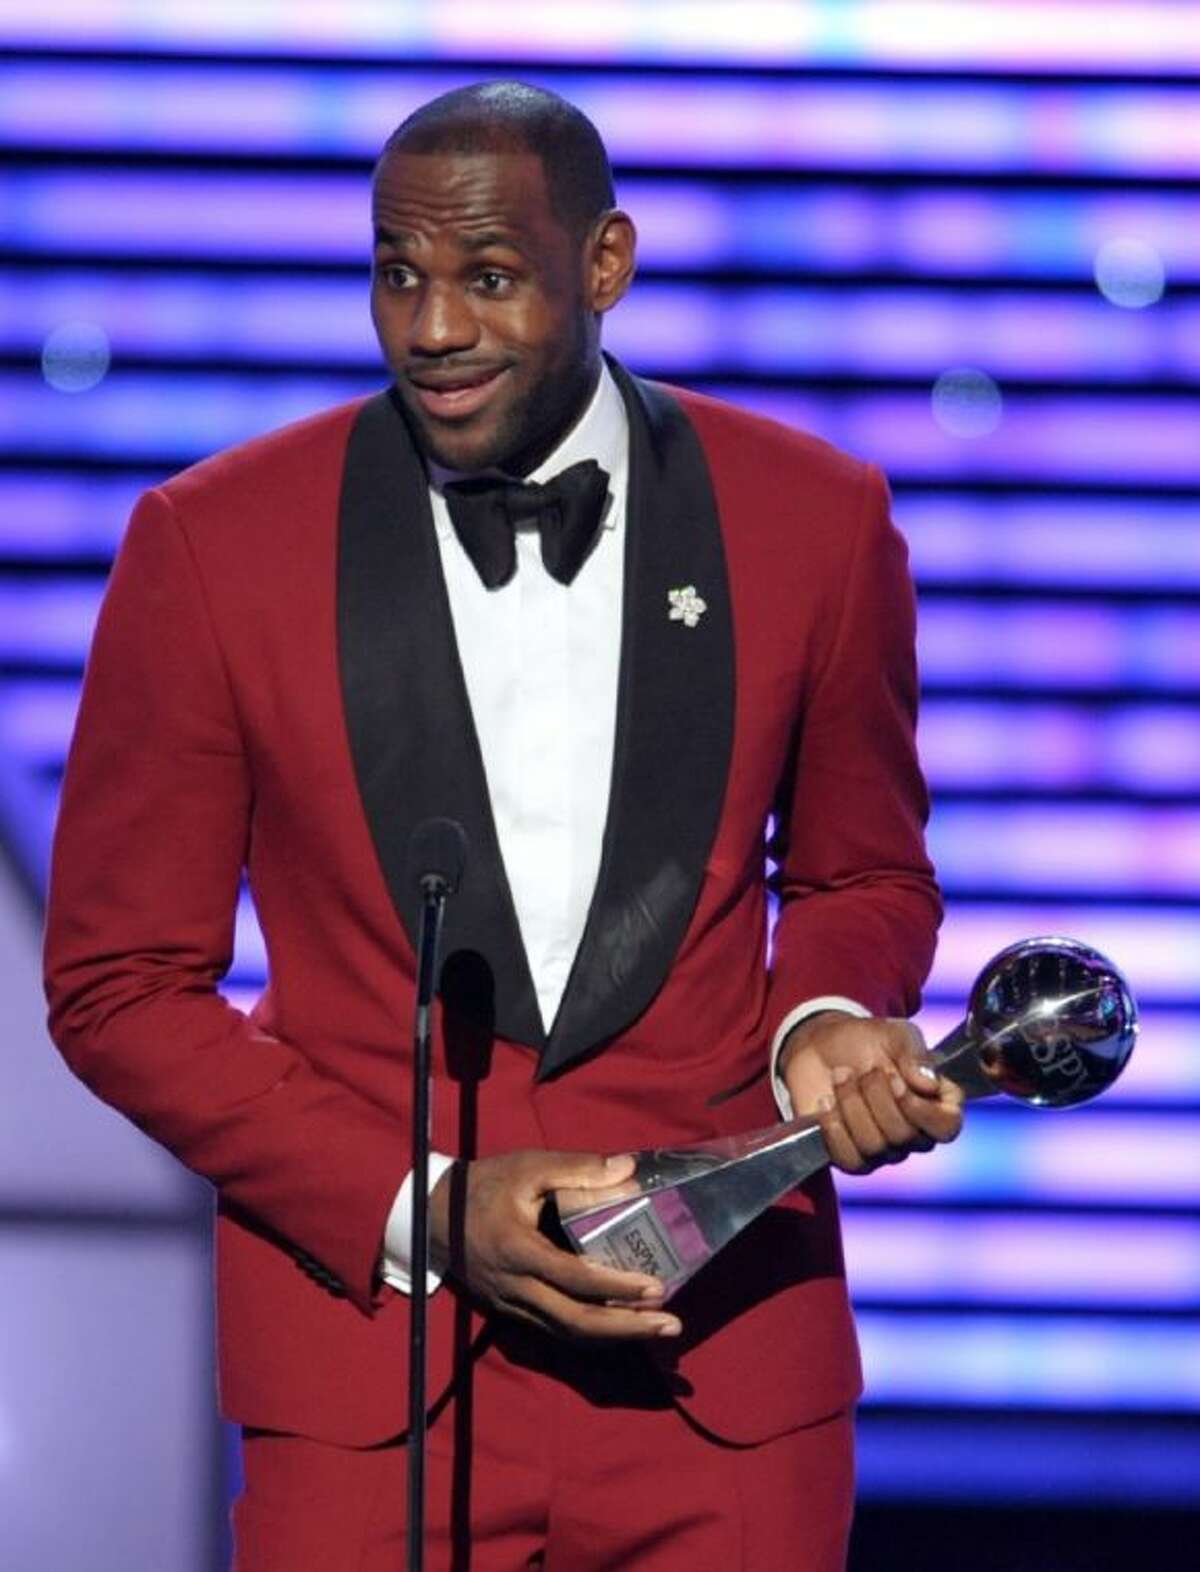 LeBron James accepts the trophy for best male athlete at the ESPY Awards on Wednesday at the Nokia Theater in Los Angeles.